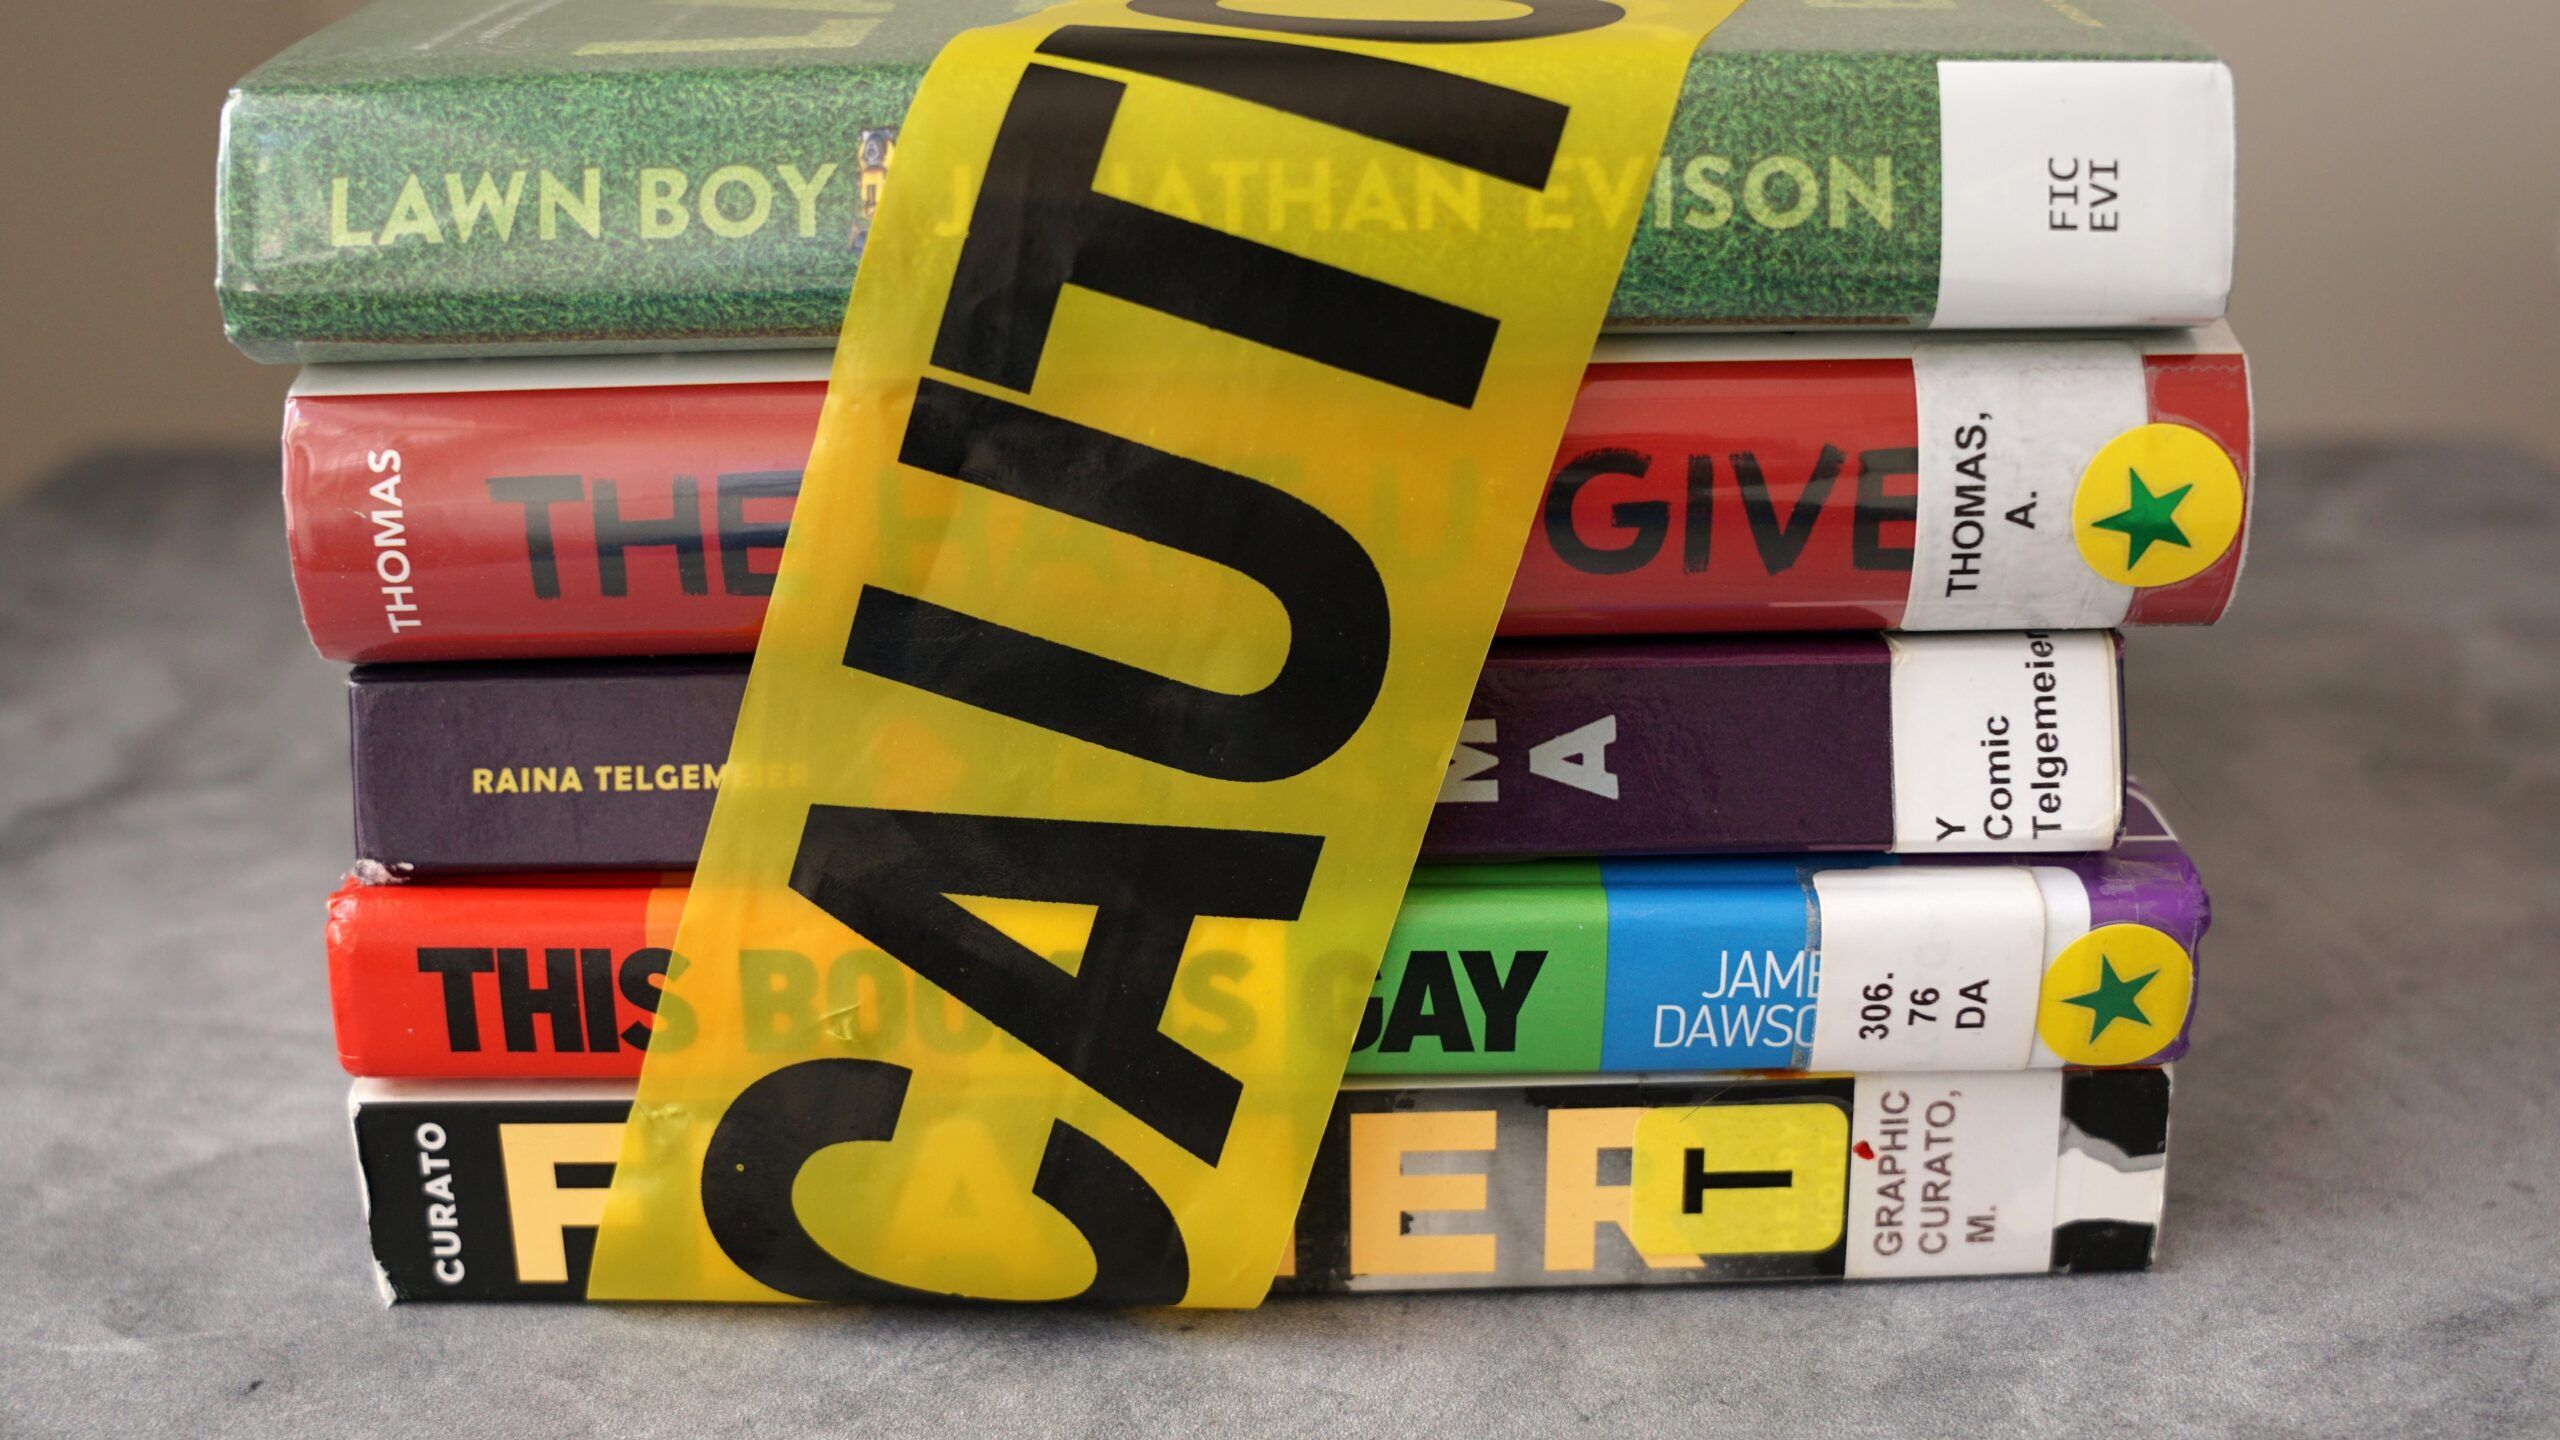 Chicago, IL, USA - May 10 2023: A stack of books found on frequently banned book lists wrapped in caution tape